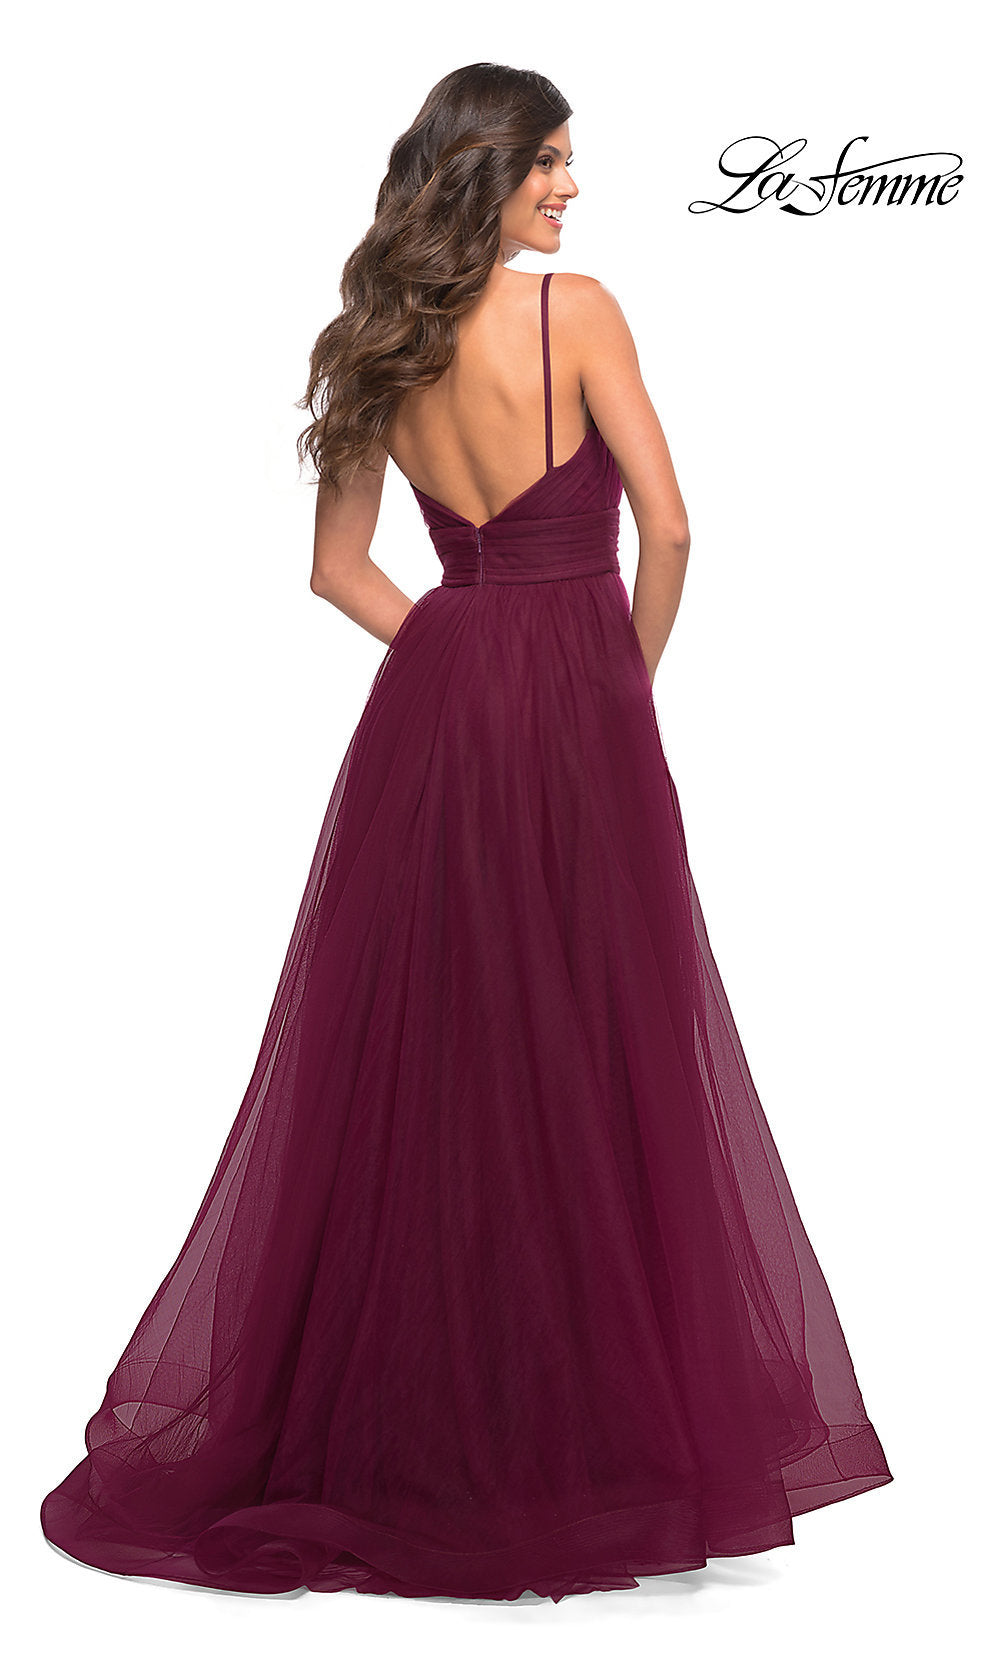 La Femme Long A-Line Tulle Ball Gown for Prom